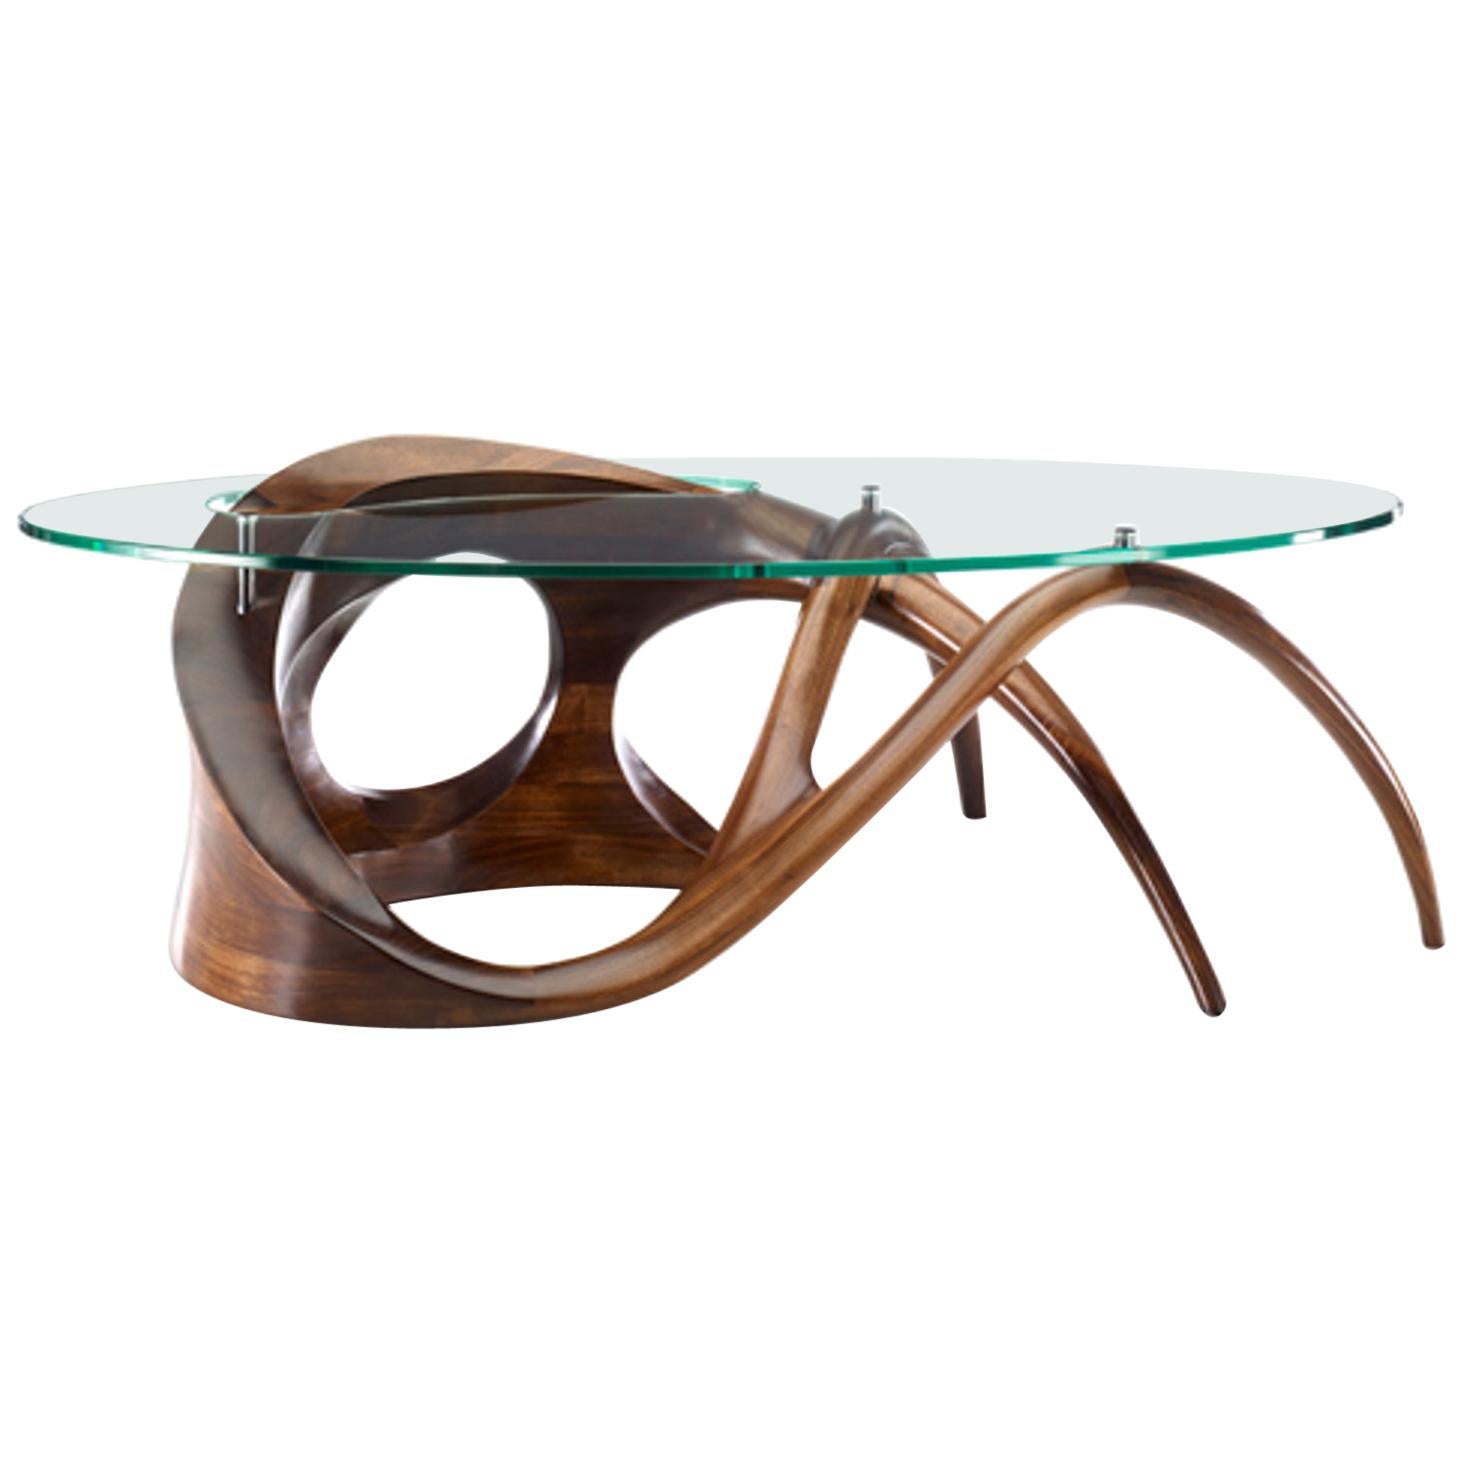 La Chimère I Sculpted Black Walnut Coffee Table Signed by Gildas Berthelot